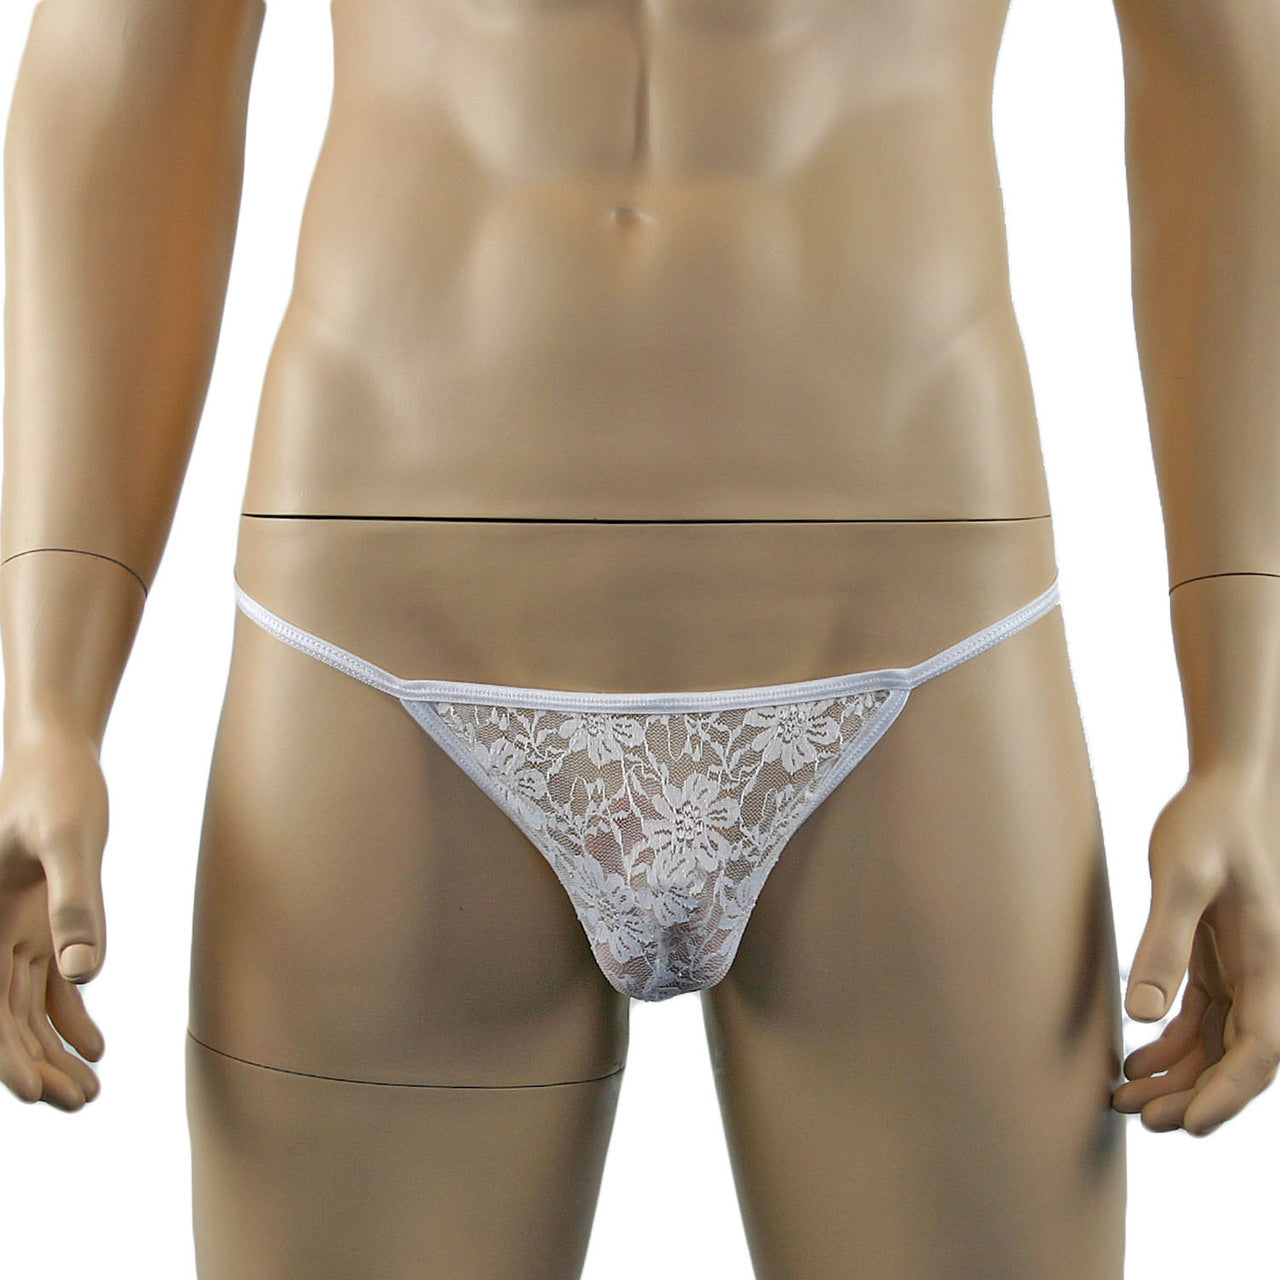 Mens Lace Crop Bra Top Camisole and Male Lingerie G string White